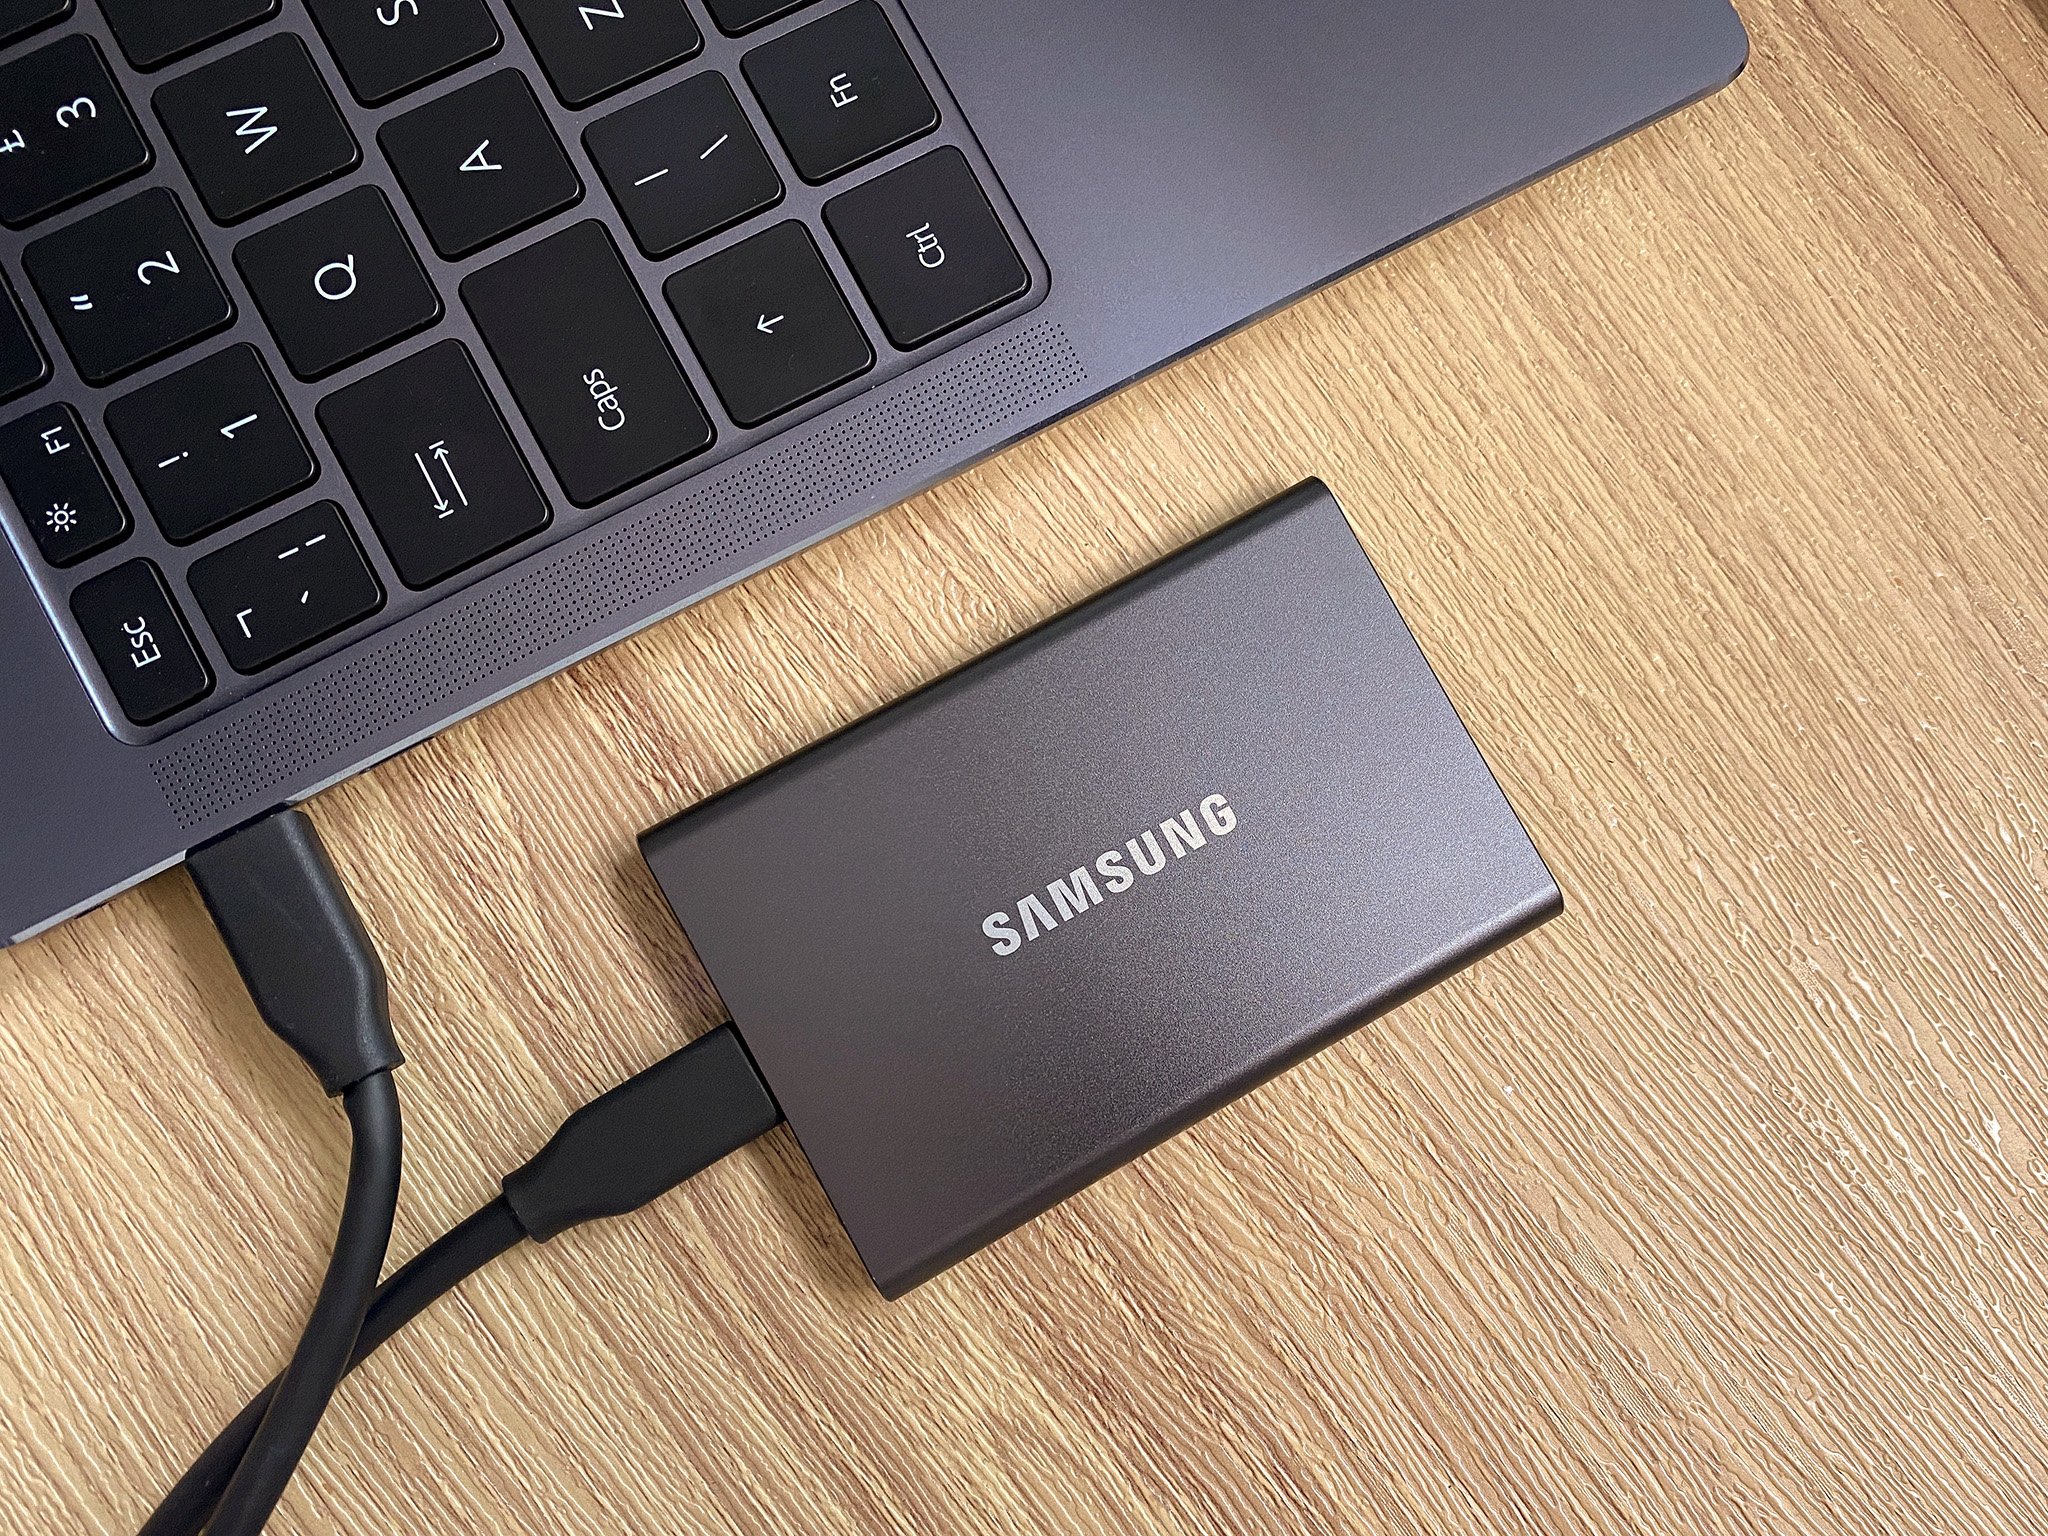 Samsung T7 1TB USB 3.2 Gen2 SSD for less than $100 on Amazon